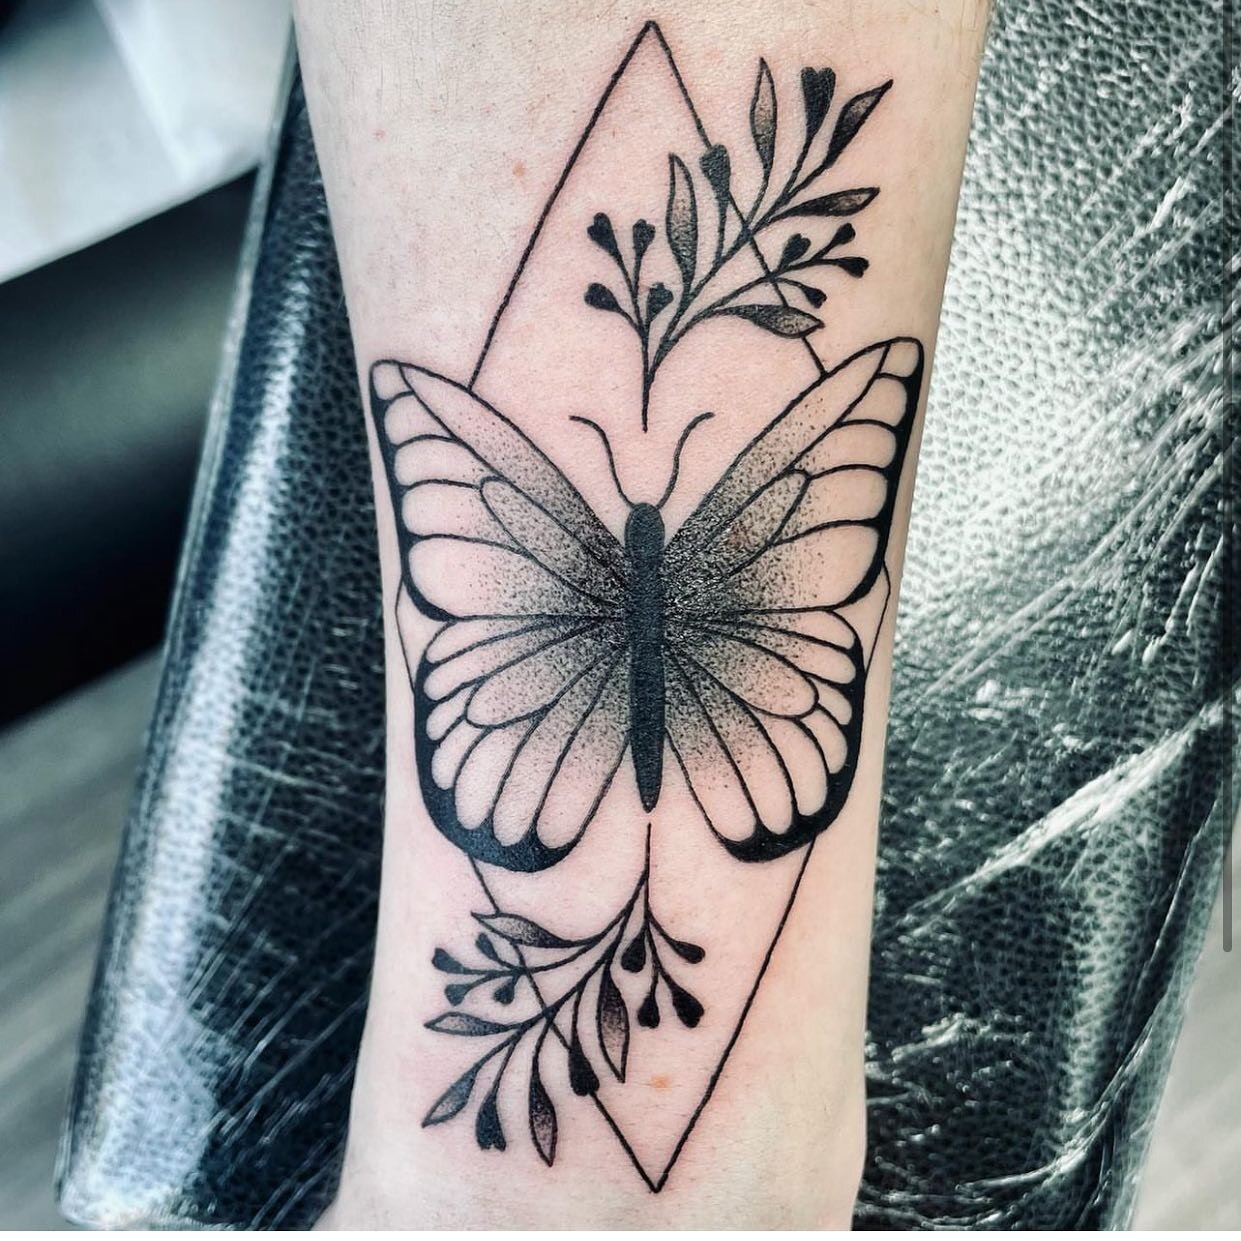 A butterfly design done by @amyrose.tattoo give Amy a follow and check out what other awesome designs she has ready for you. #tattoo #tattoos #like #follow #love #butterfly #butterflytattoo #dotwork #dotworktattoo